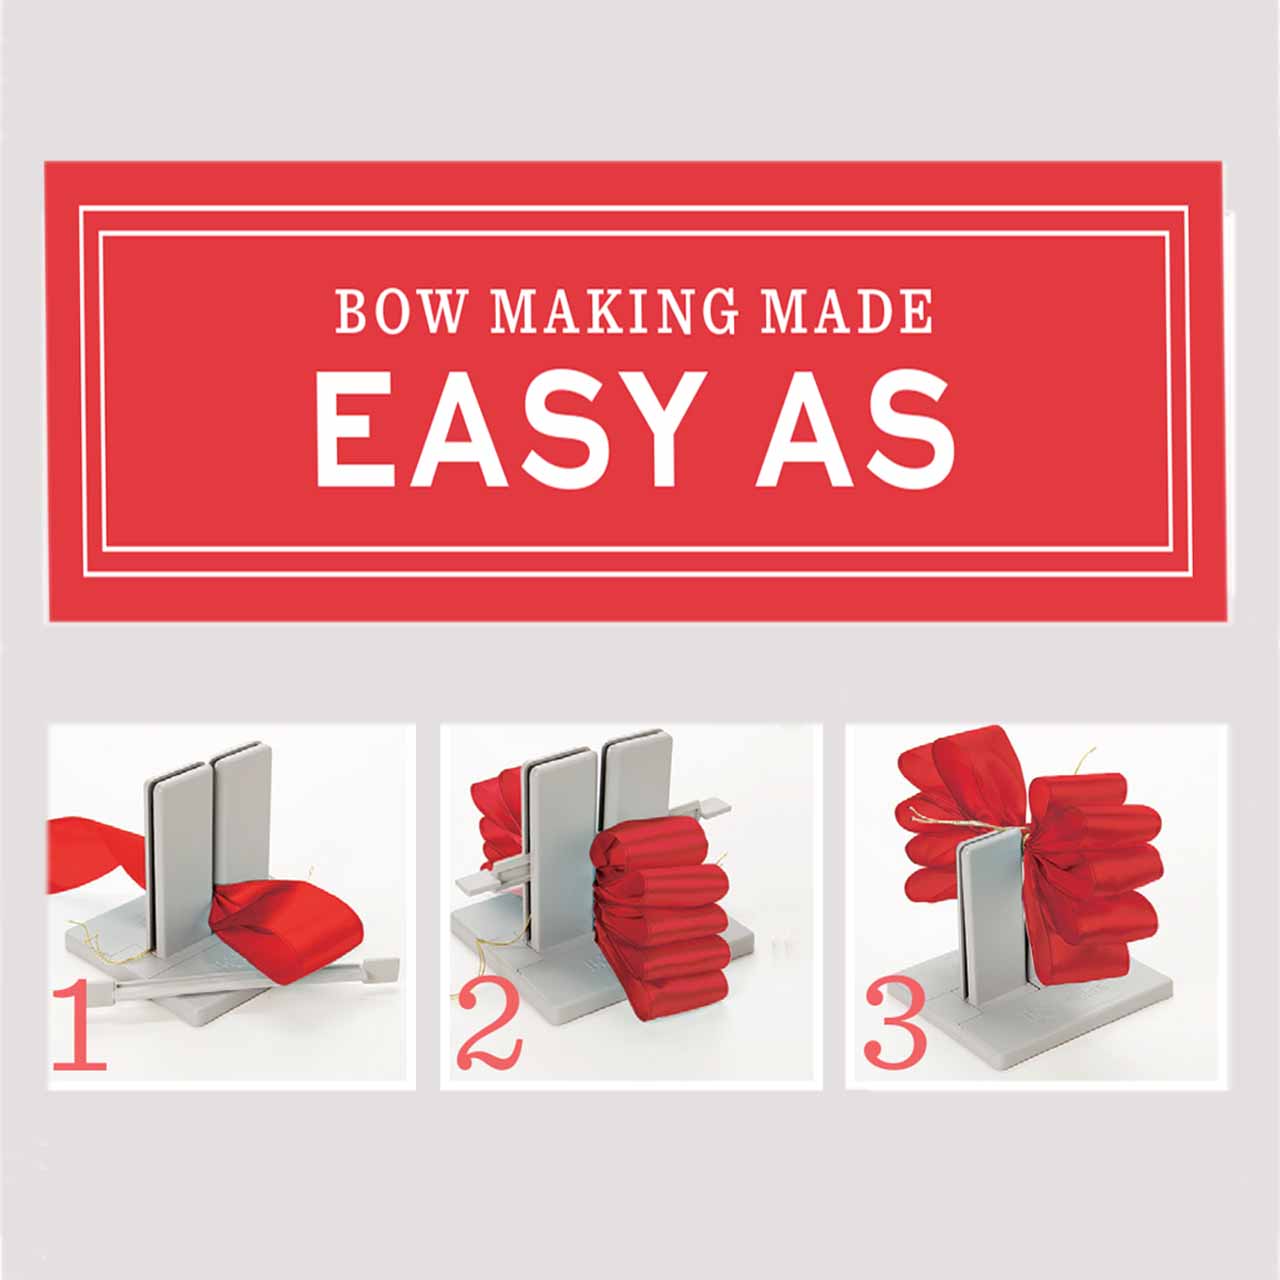 Mini Bowdabra Bowmaker - How to make perfect bows, every single time!